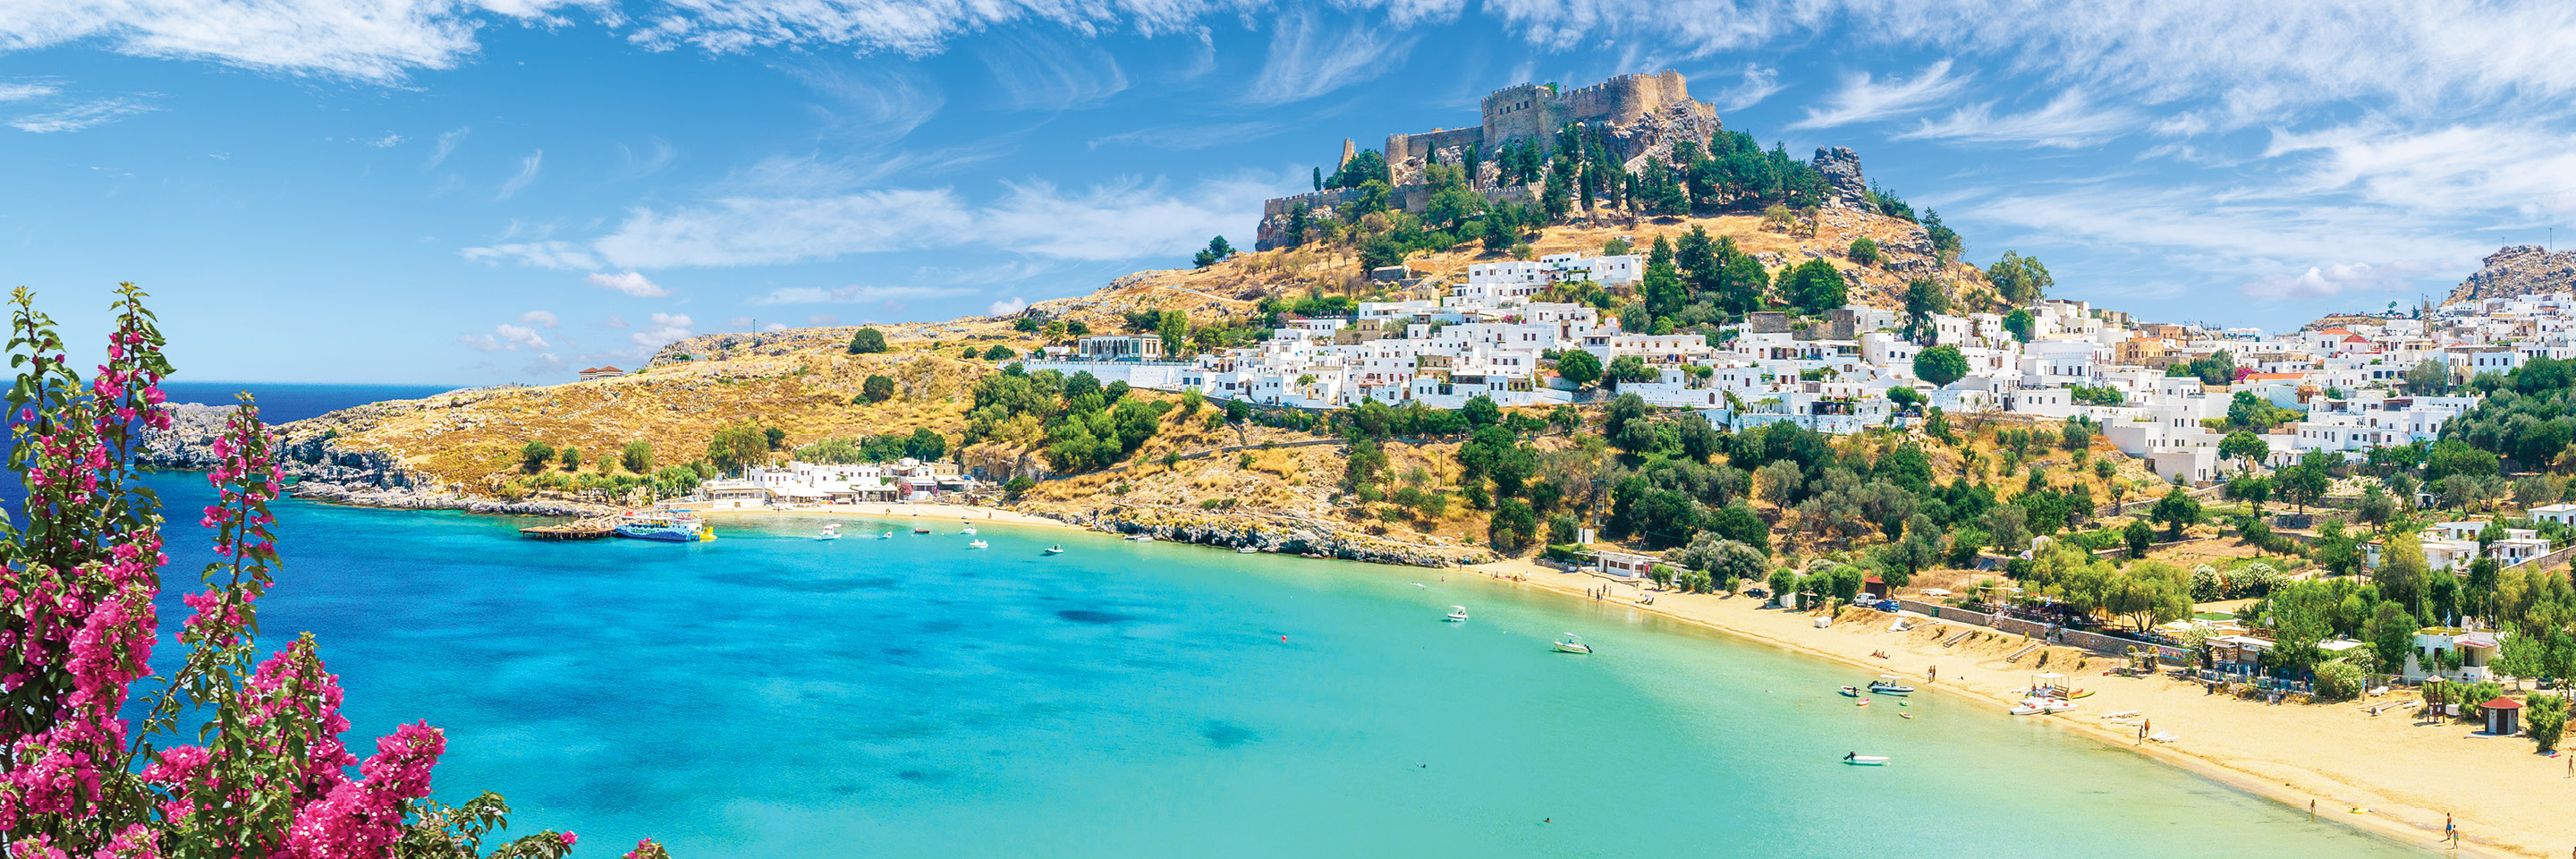 Highlights of Greece Escape plus 4-night Iconic Aegean Cruise